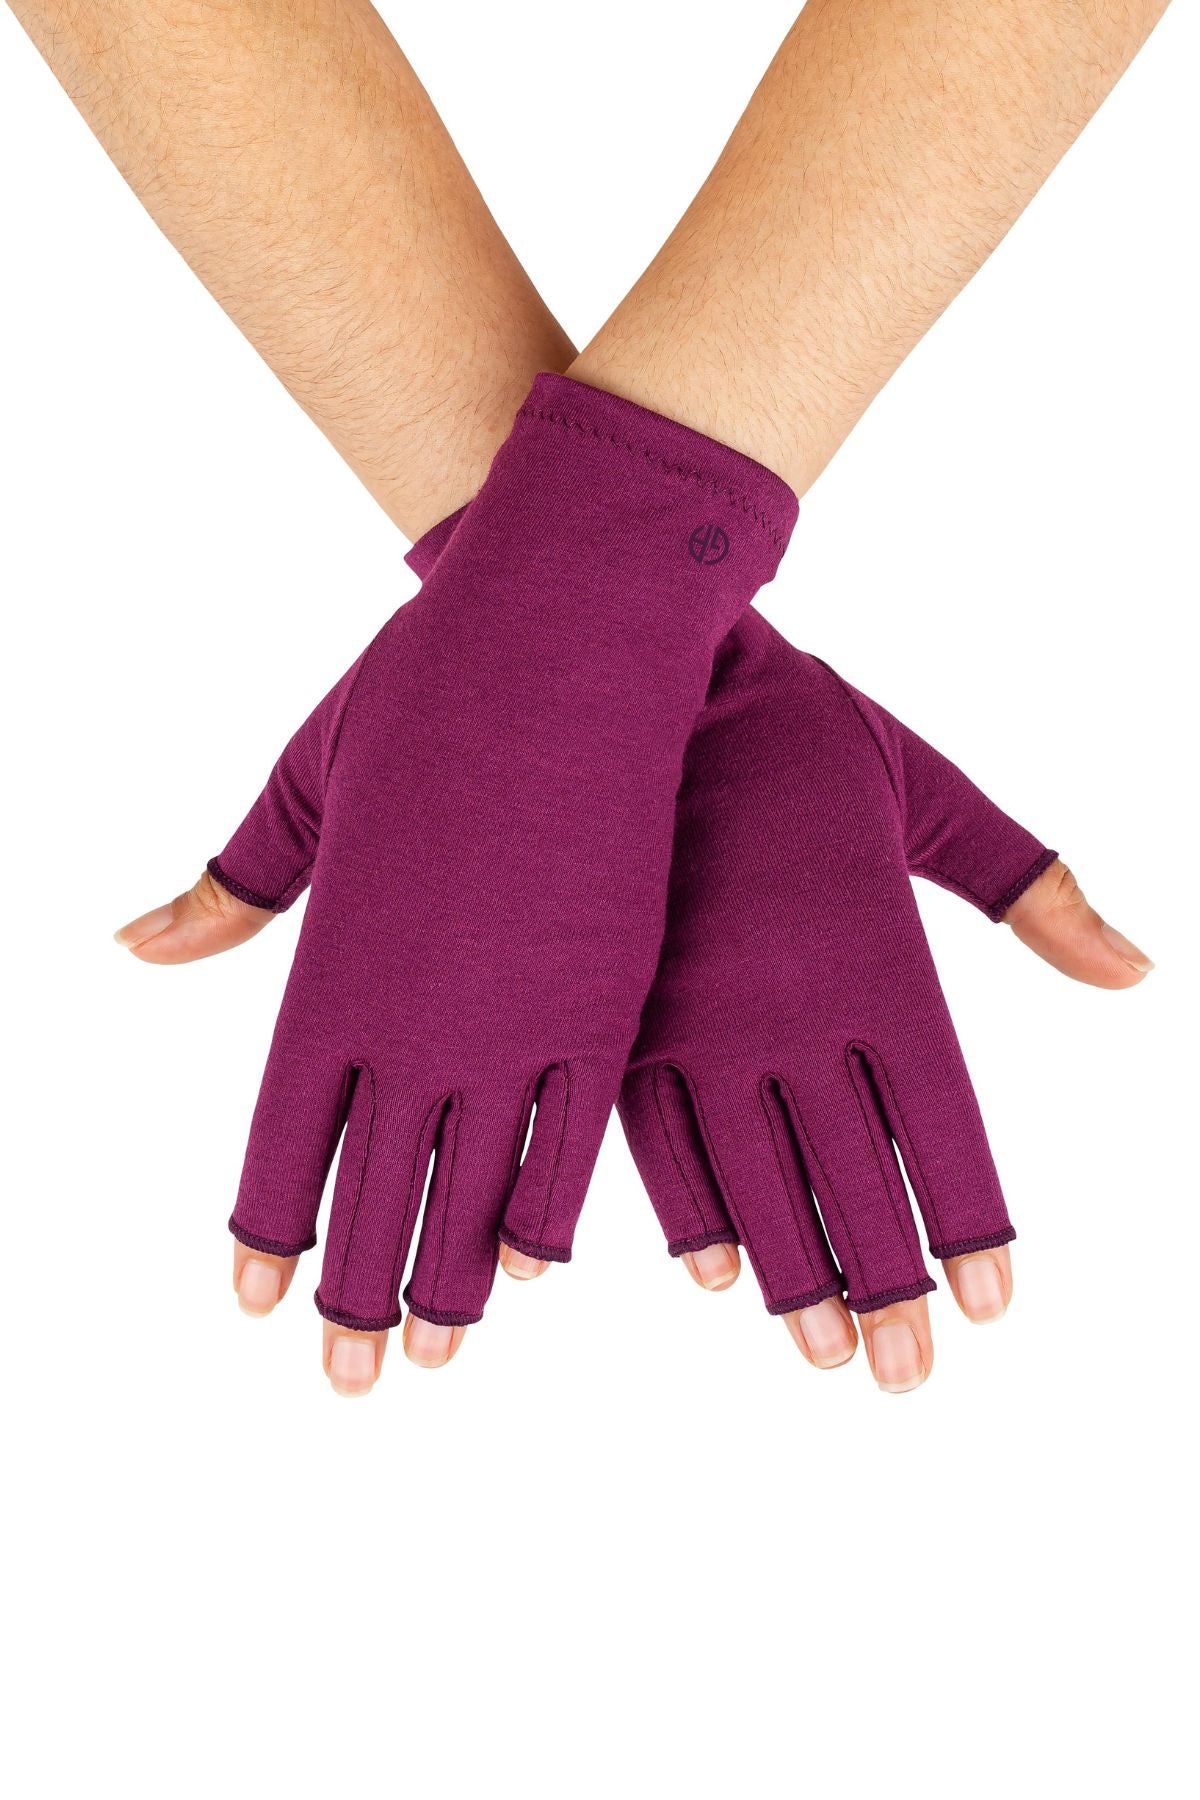 A pair of Plum Purple Compression Gloves worn by a woman with arthritis, her hands crossed at wrists with palms facing down on a white background.